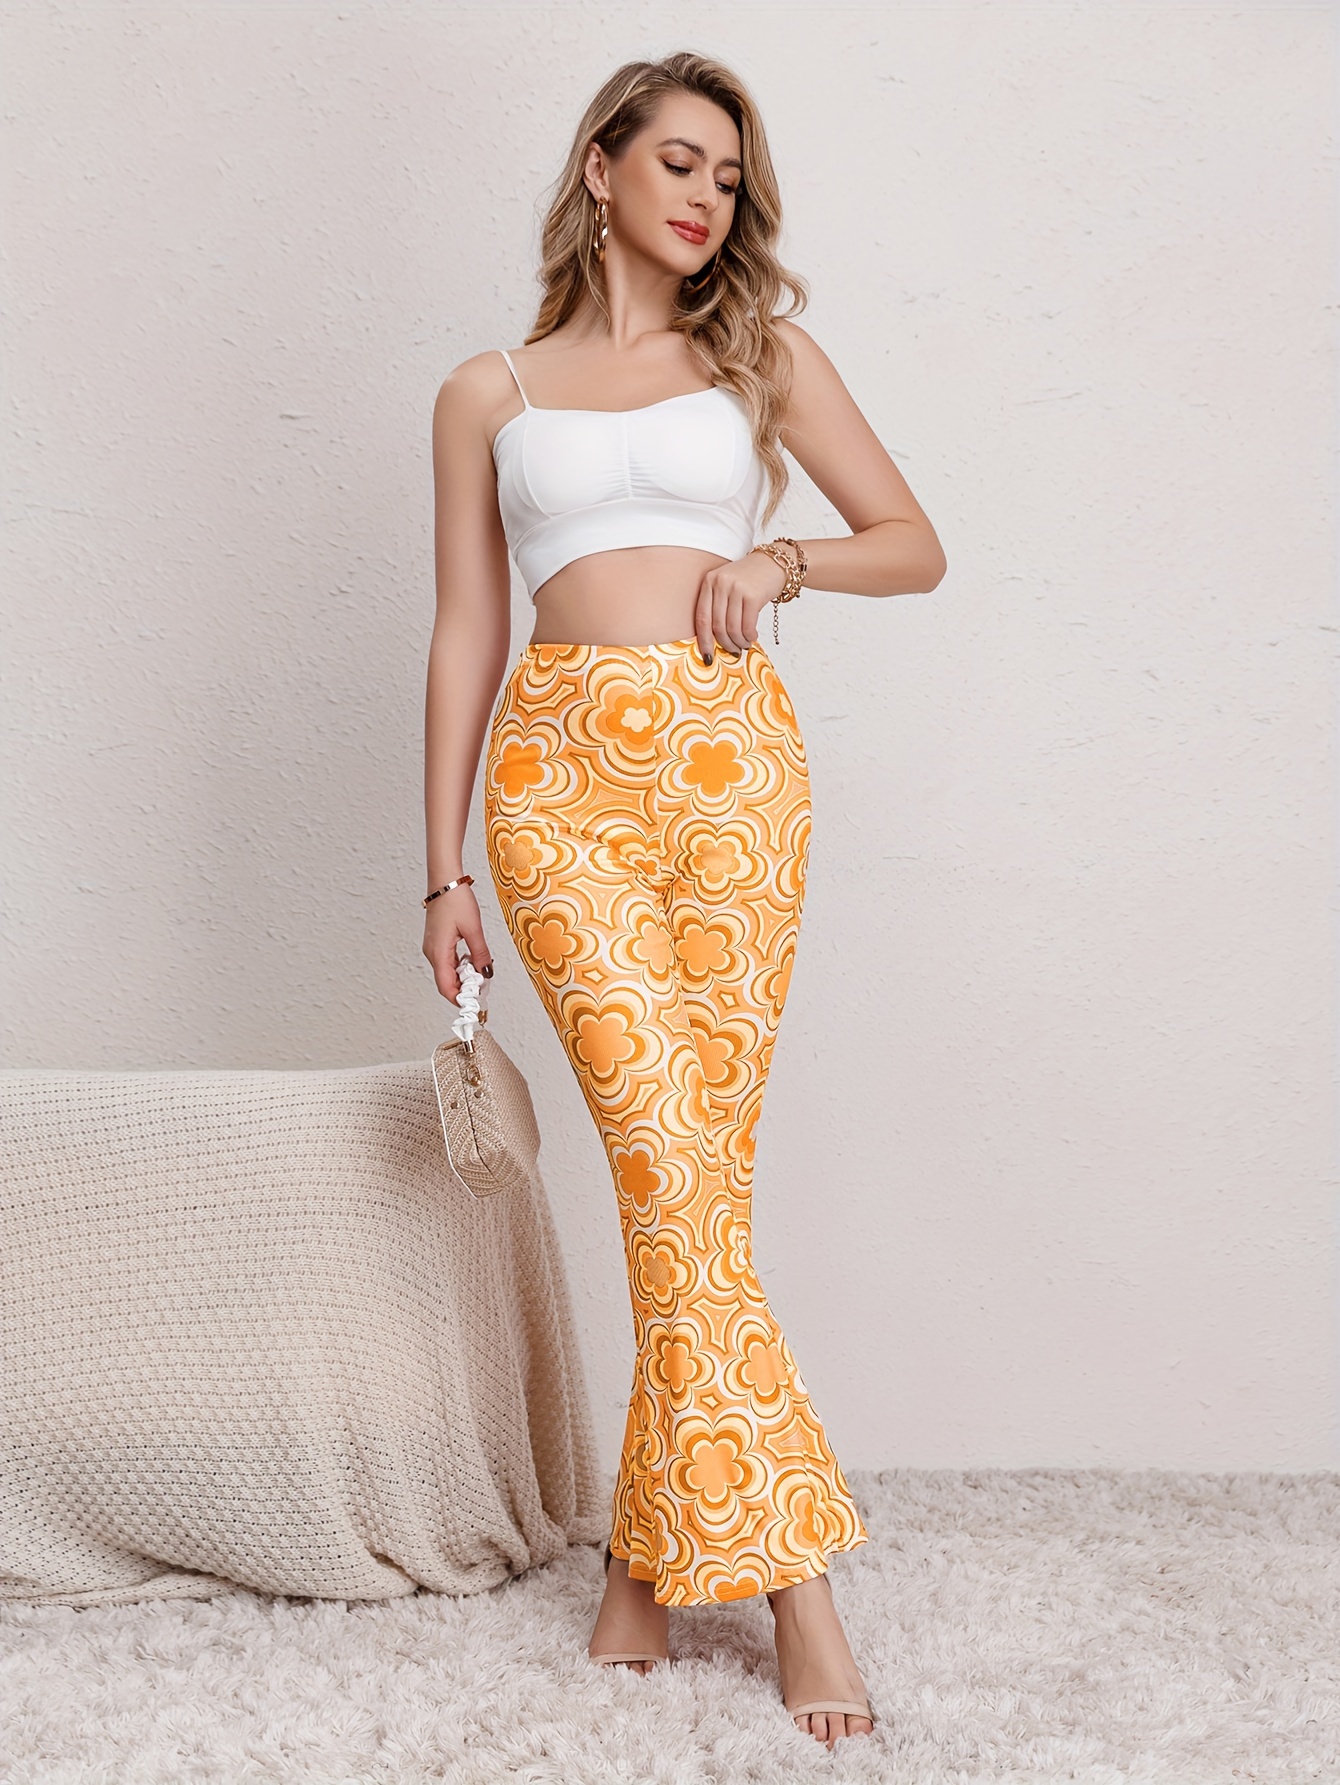 Women Flare Pants 70s Bell Bottoms Floral Boho Printed Wide Leg Flowy  Pattern Pants S at  Women's Clothing store